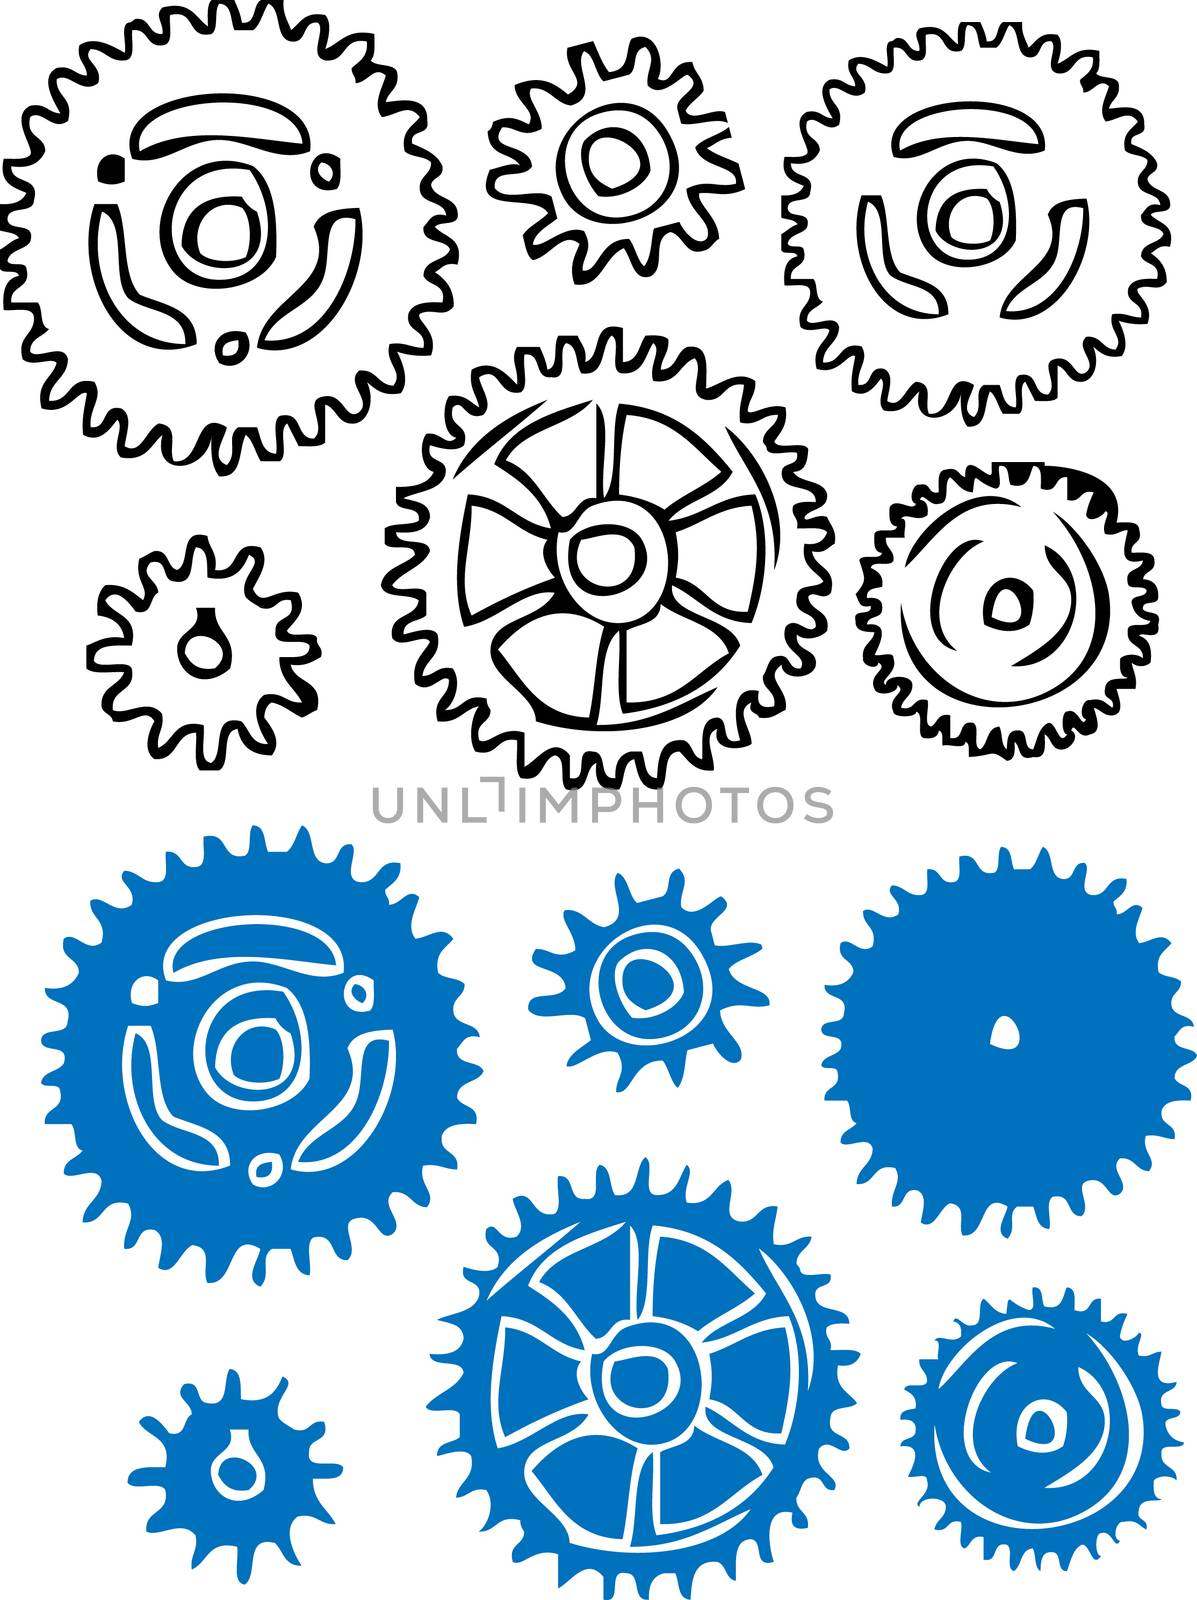 Gears vector element illustration by IconsJewelry